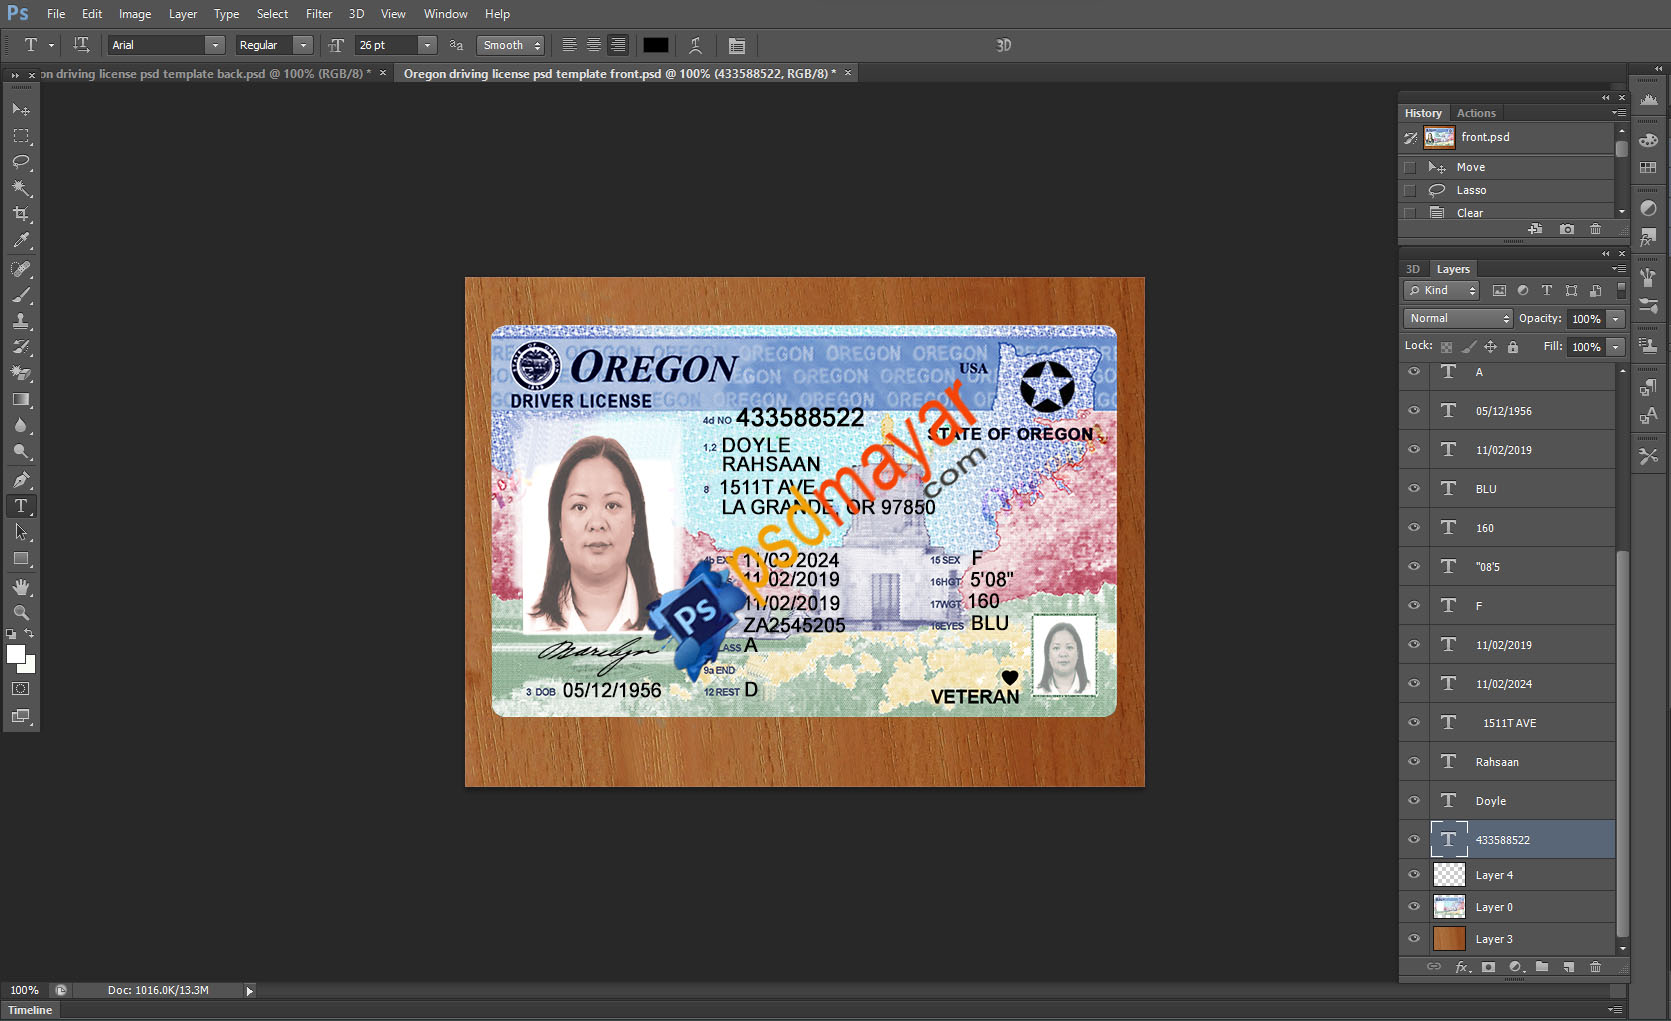 Oregon driving license psd template